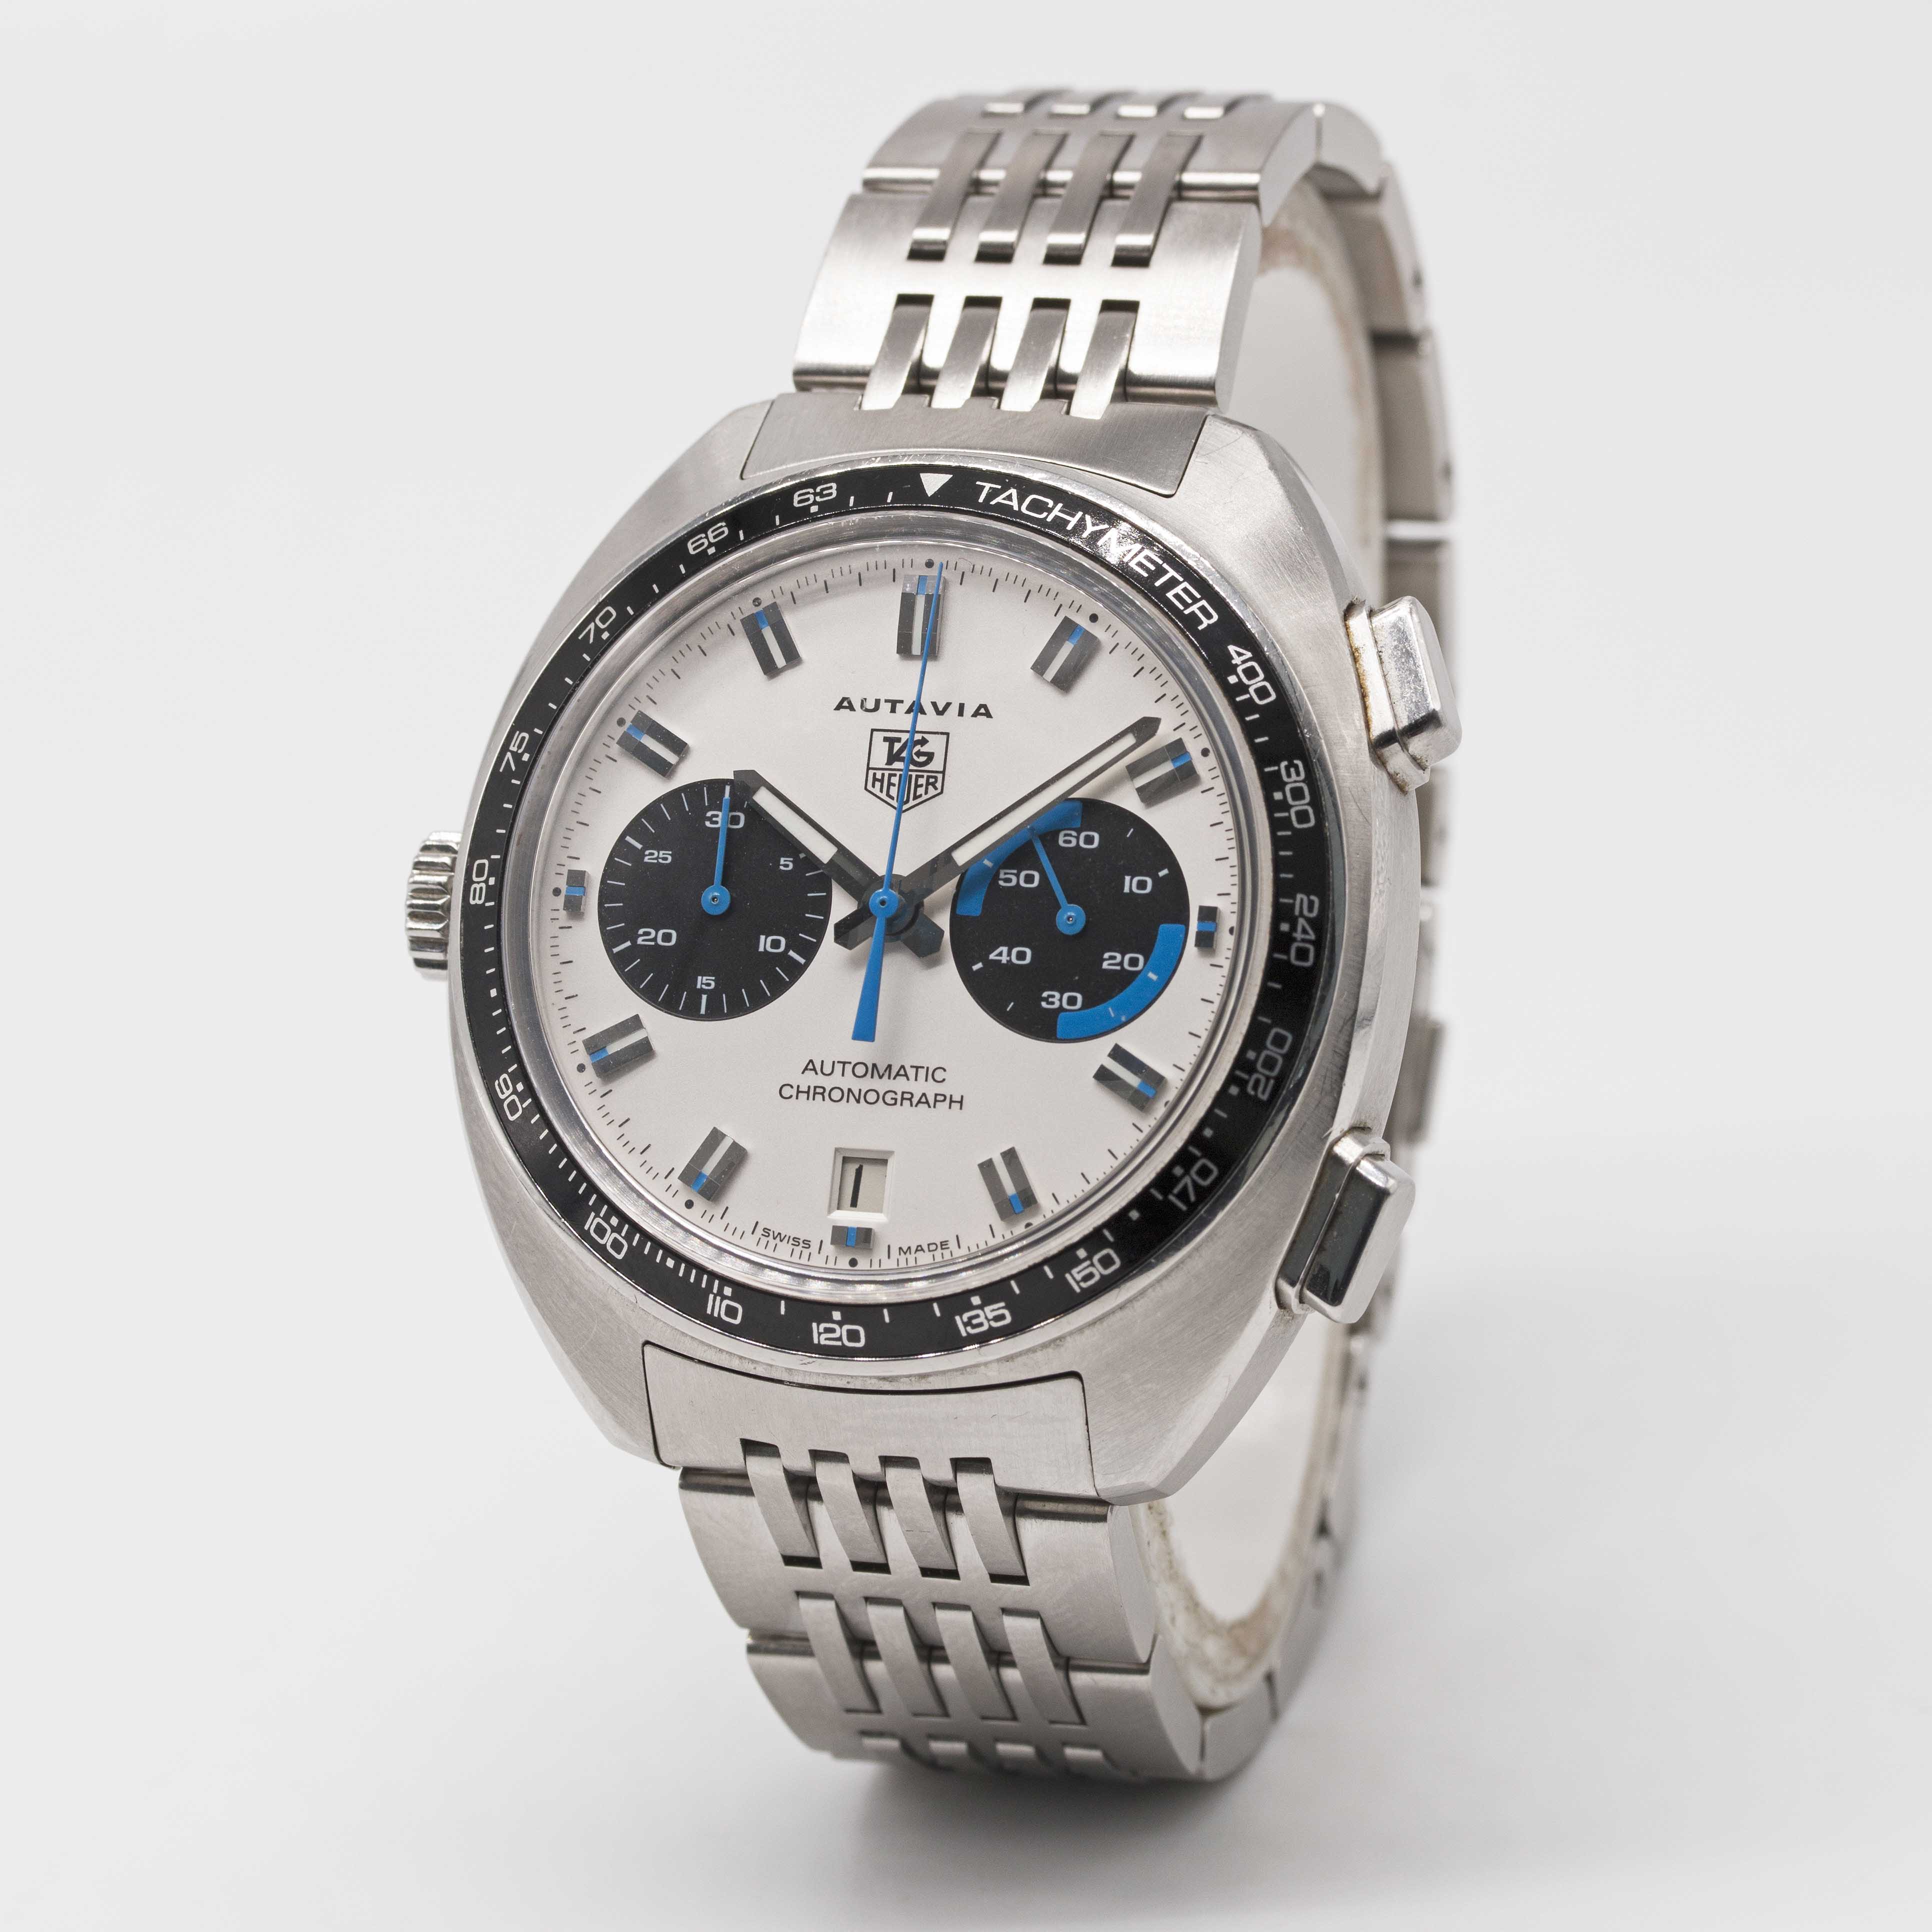 A GENTLEMAN'S STAINLESS STEEL TAG HEUER AUTAVIA AUTOMATIC CHRONOGRAPH BRACELET WATCH DATED 2003, - Image 3 of 8